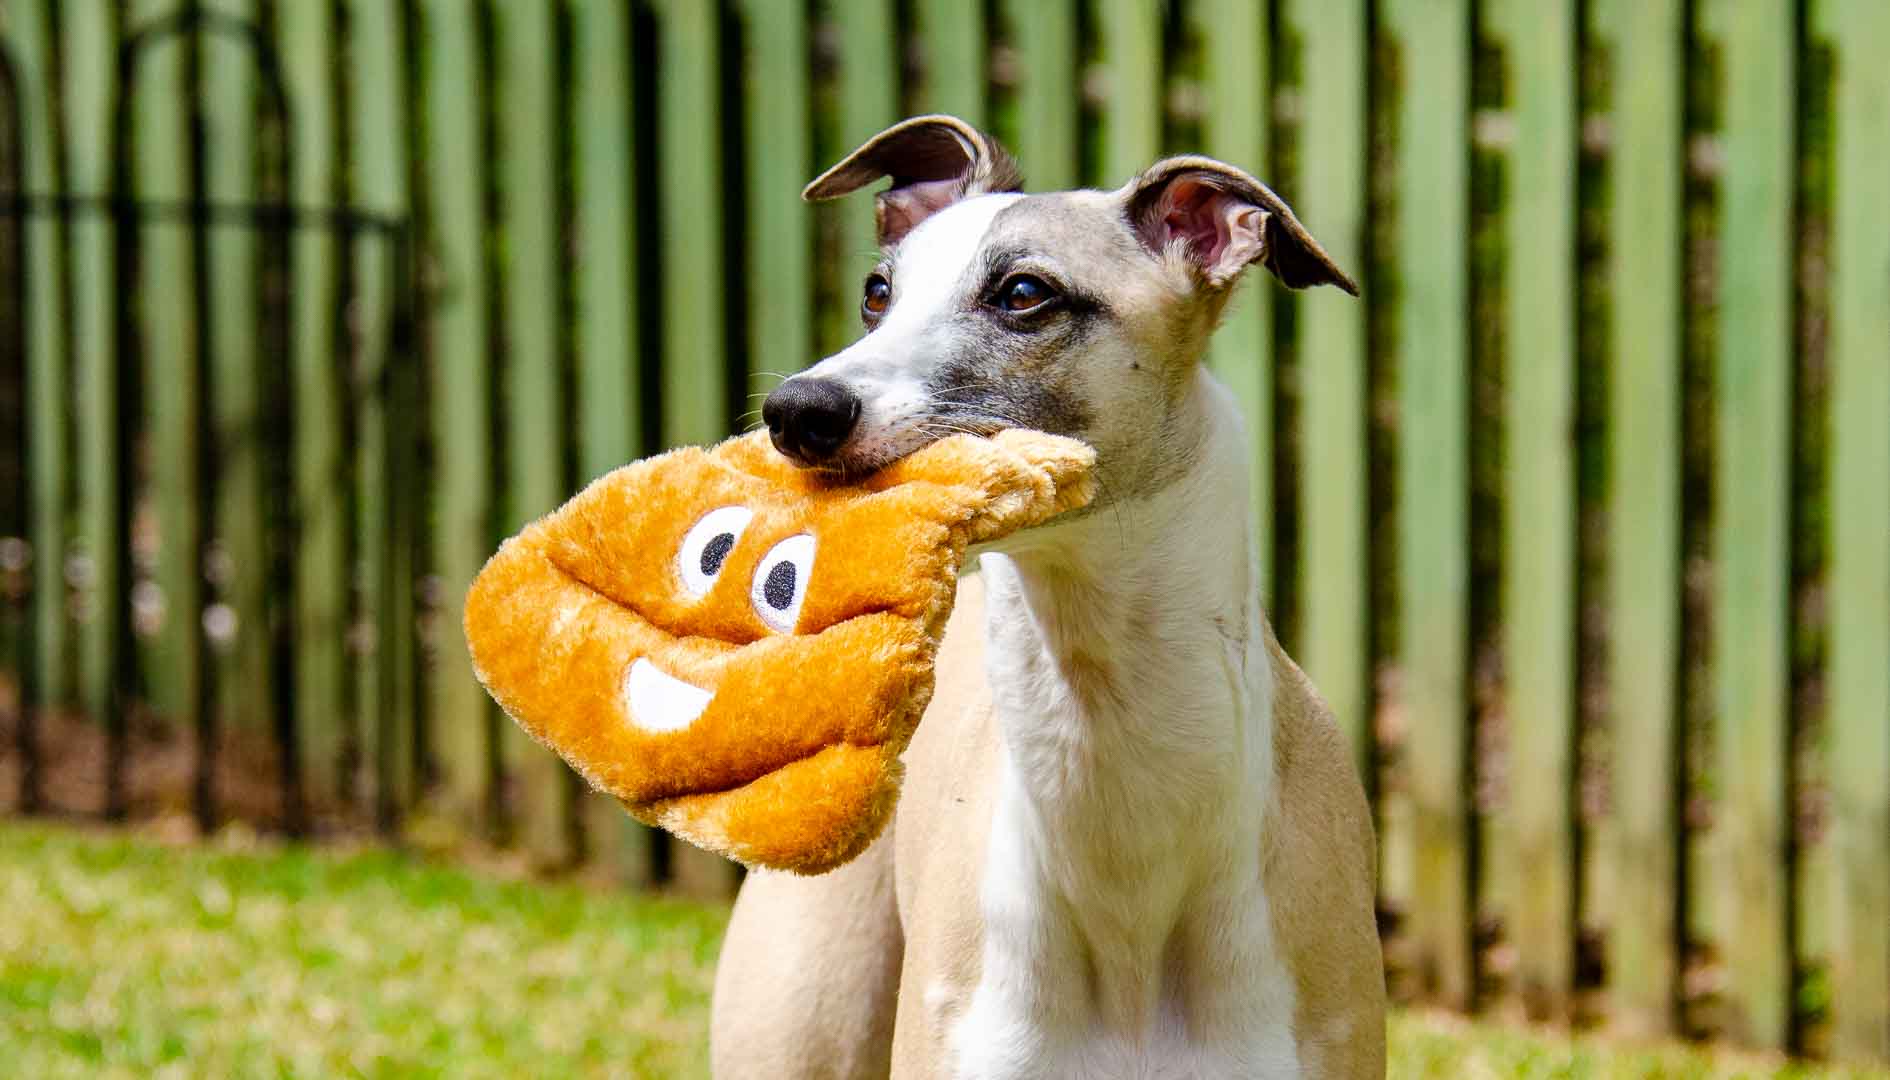 Whippet dog holding a poop emoji toy in its mouth.